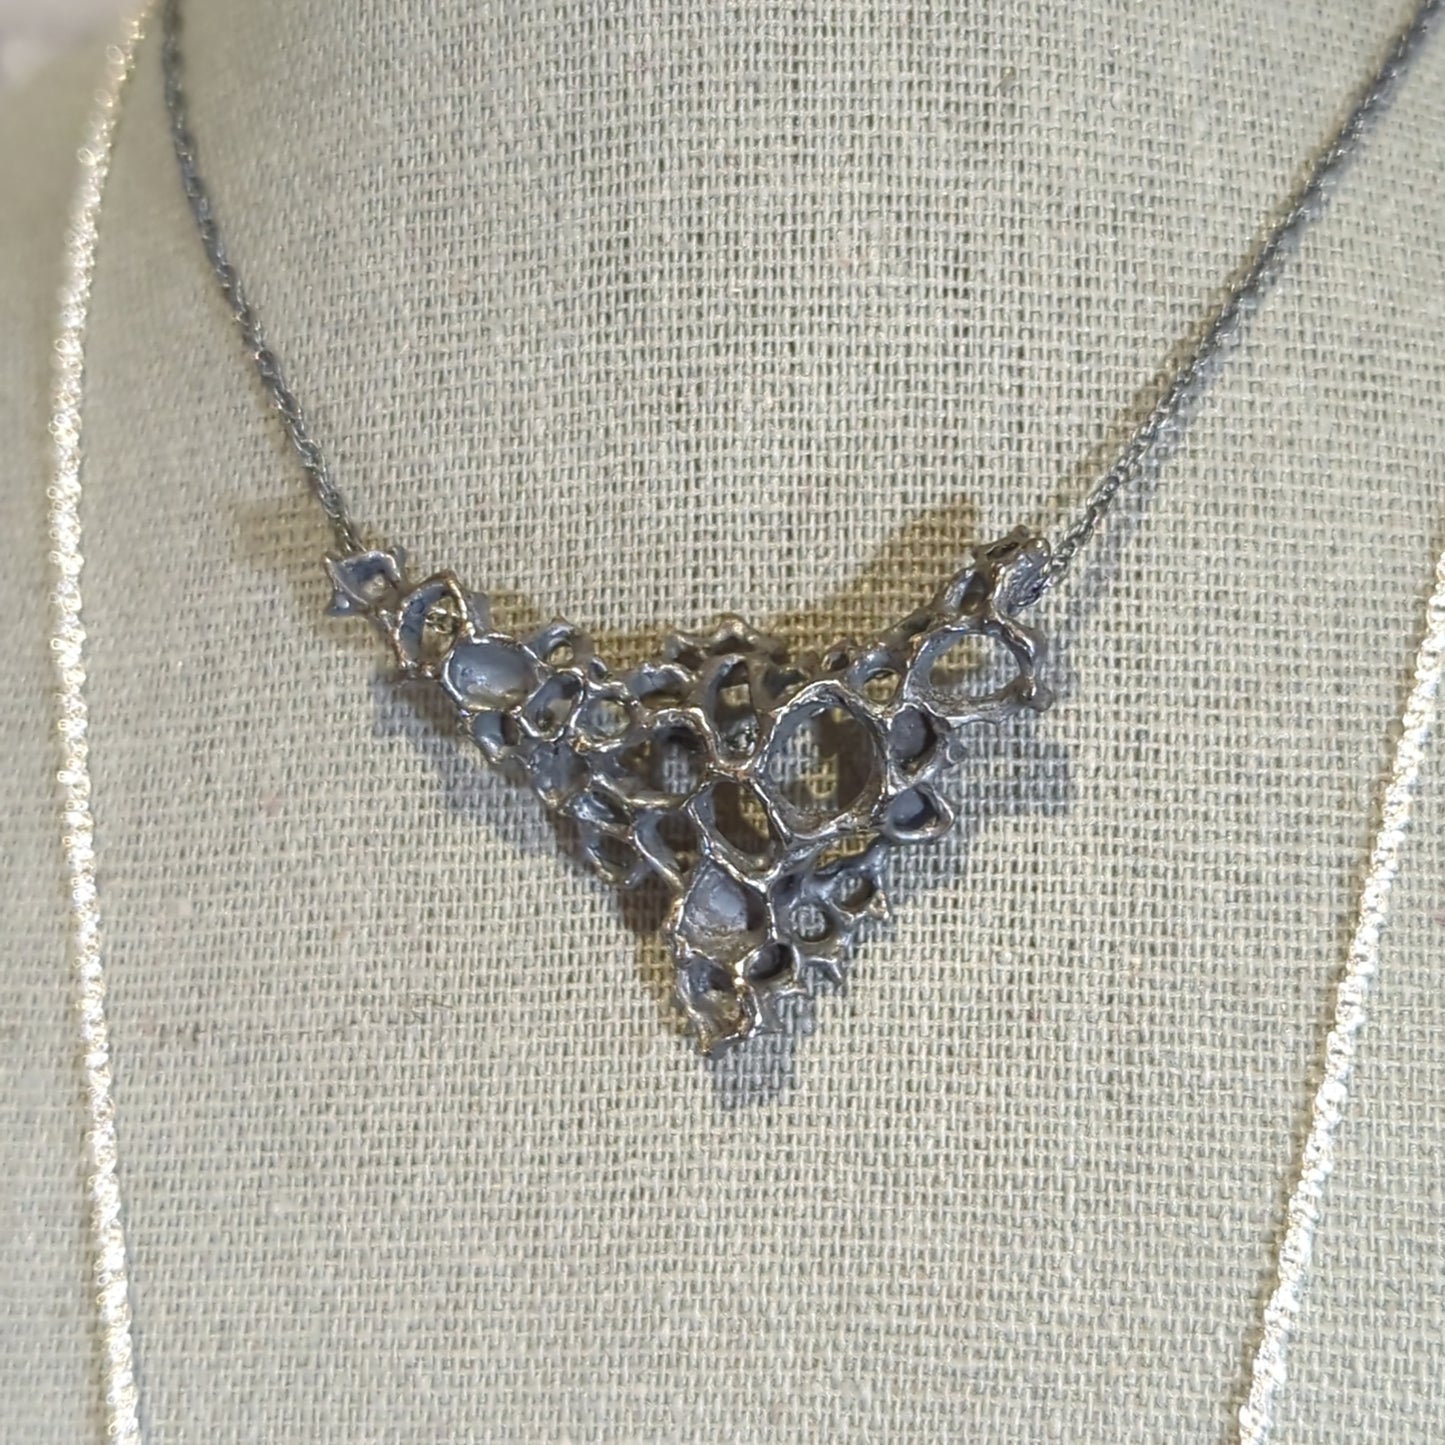 Morphogenetic Necklace. Hand carved in Ecosilver.-Jewellery-Beca Beeby